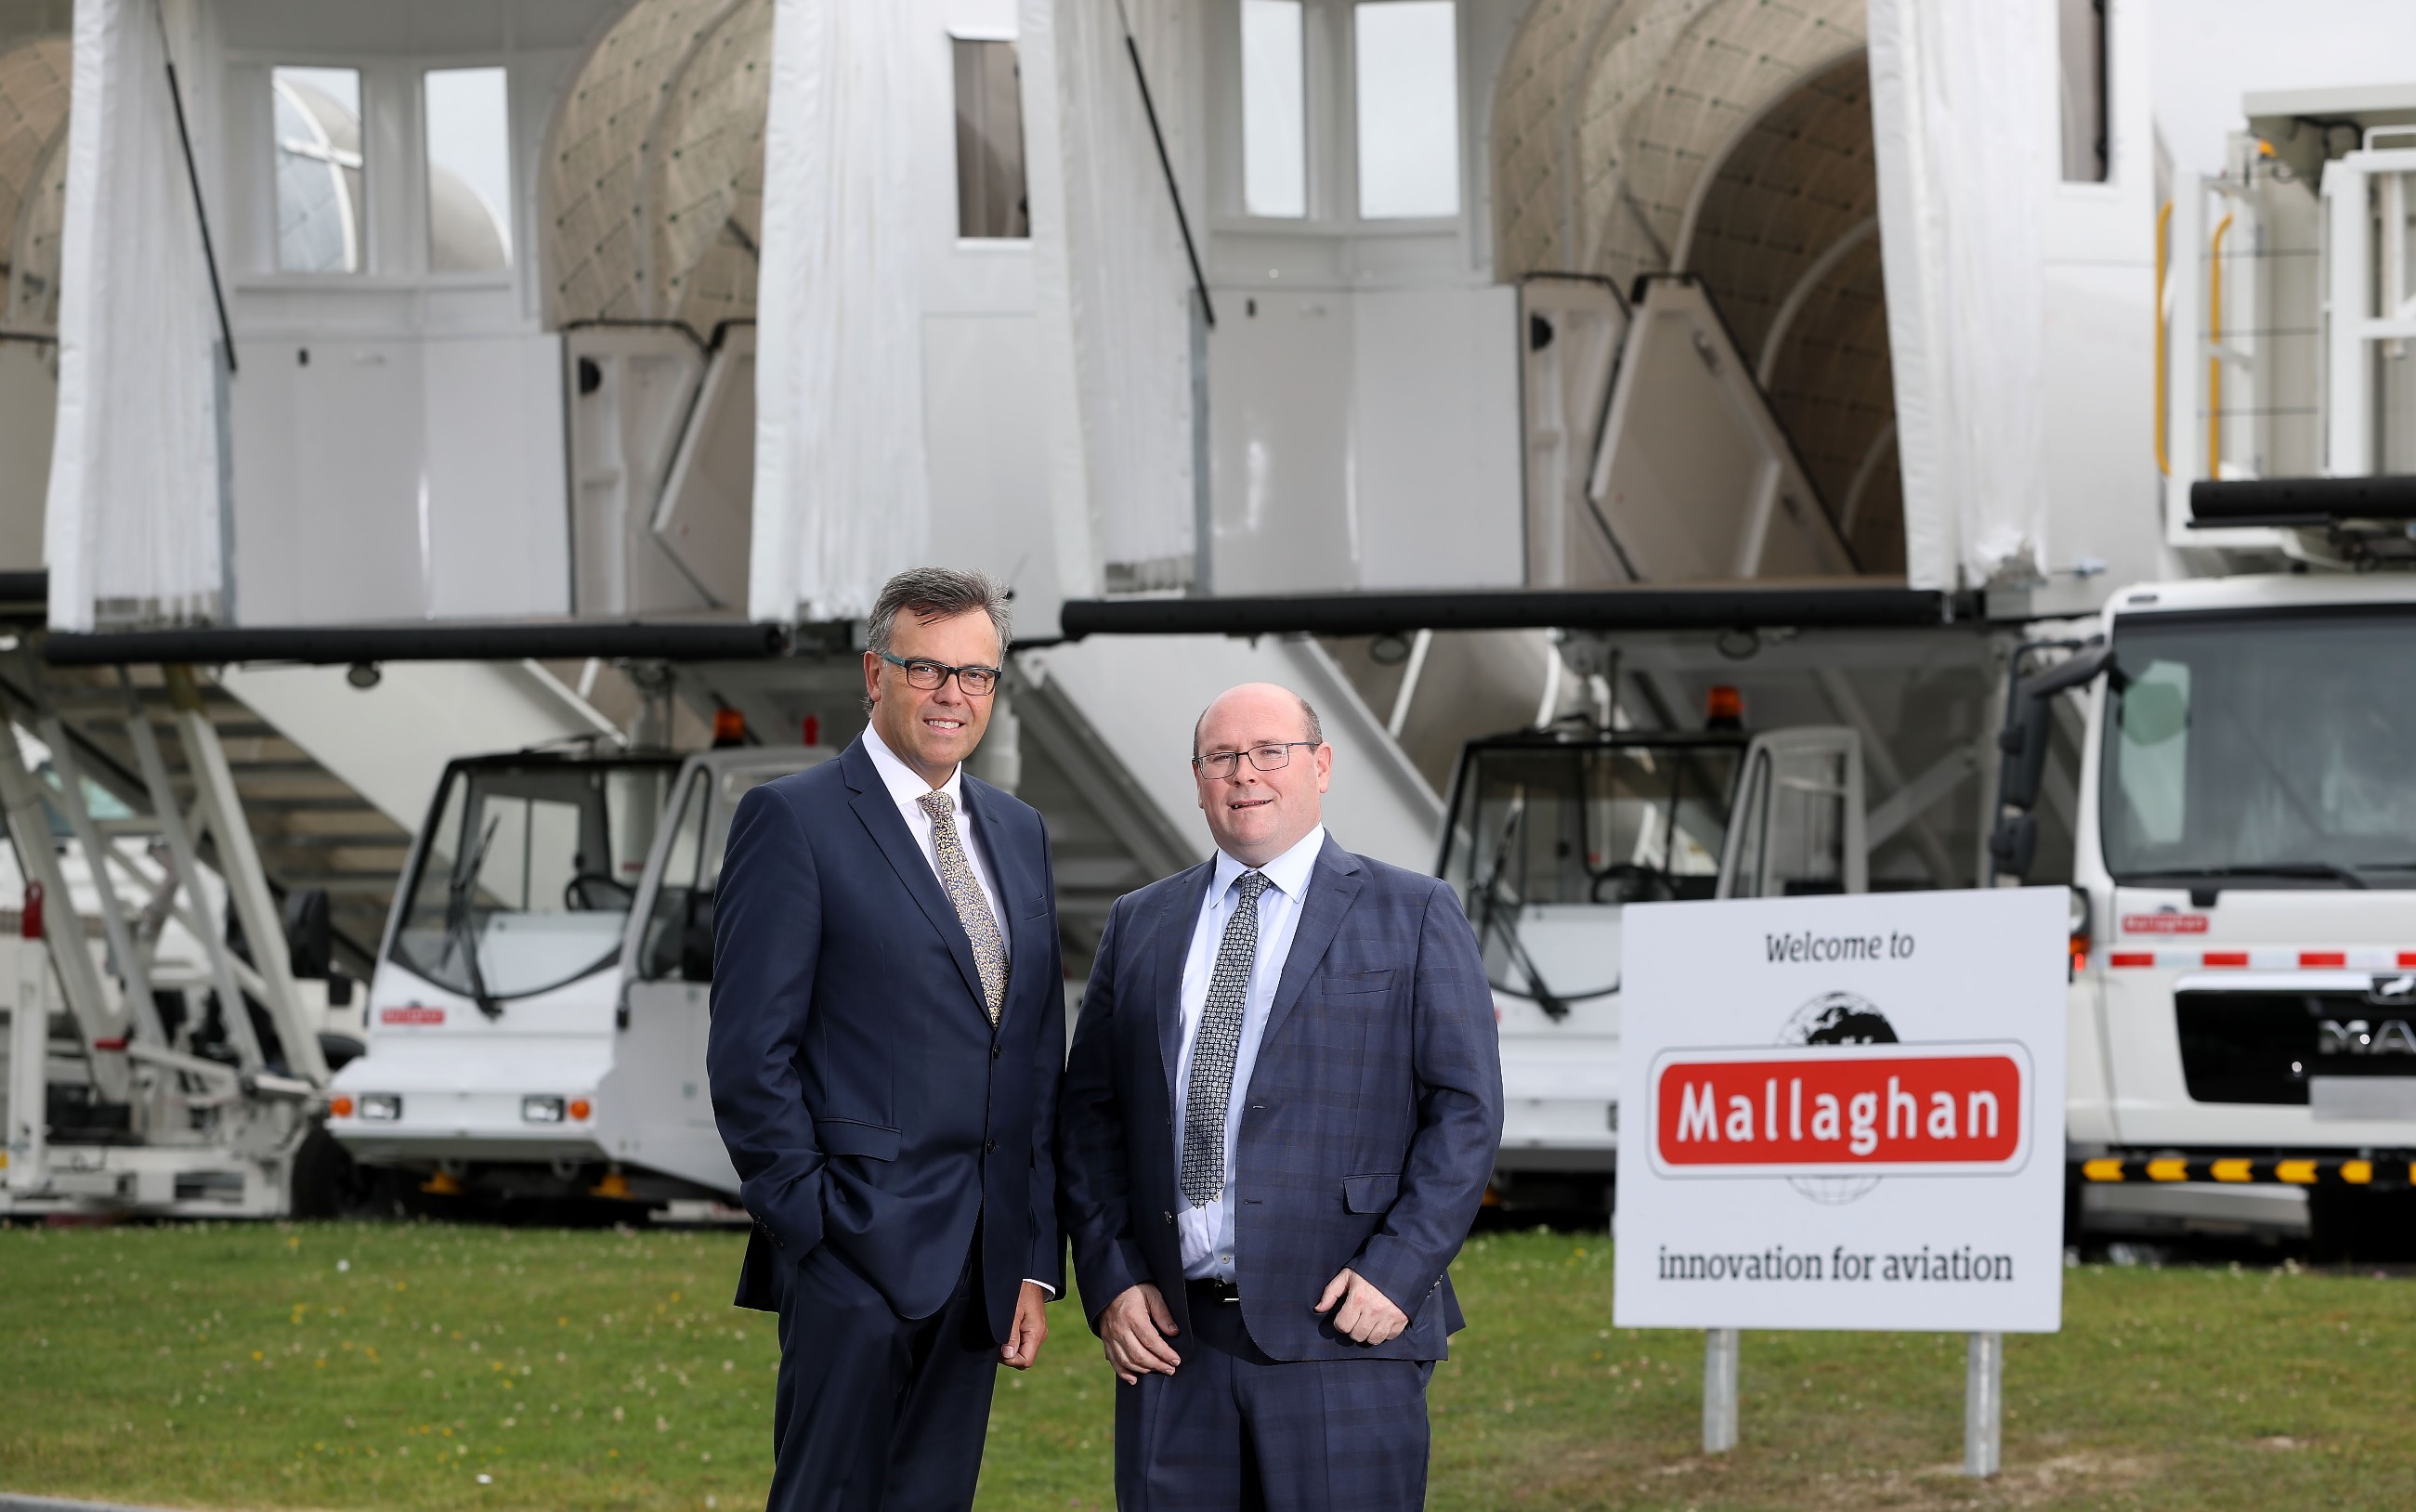 Northern Ireland aviation firm Mallaghan creating 210 jobs in Tyrone